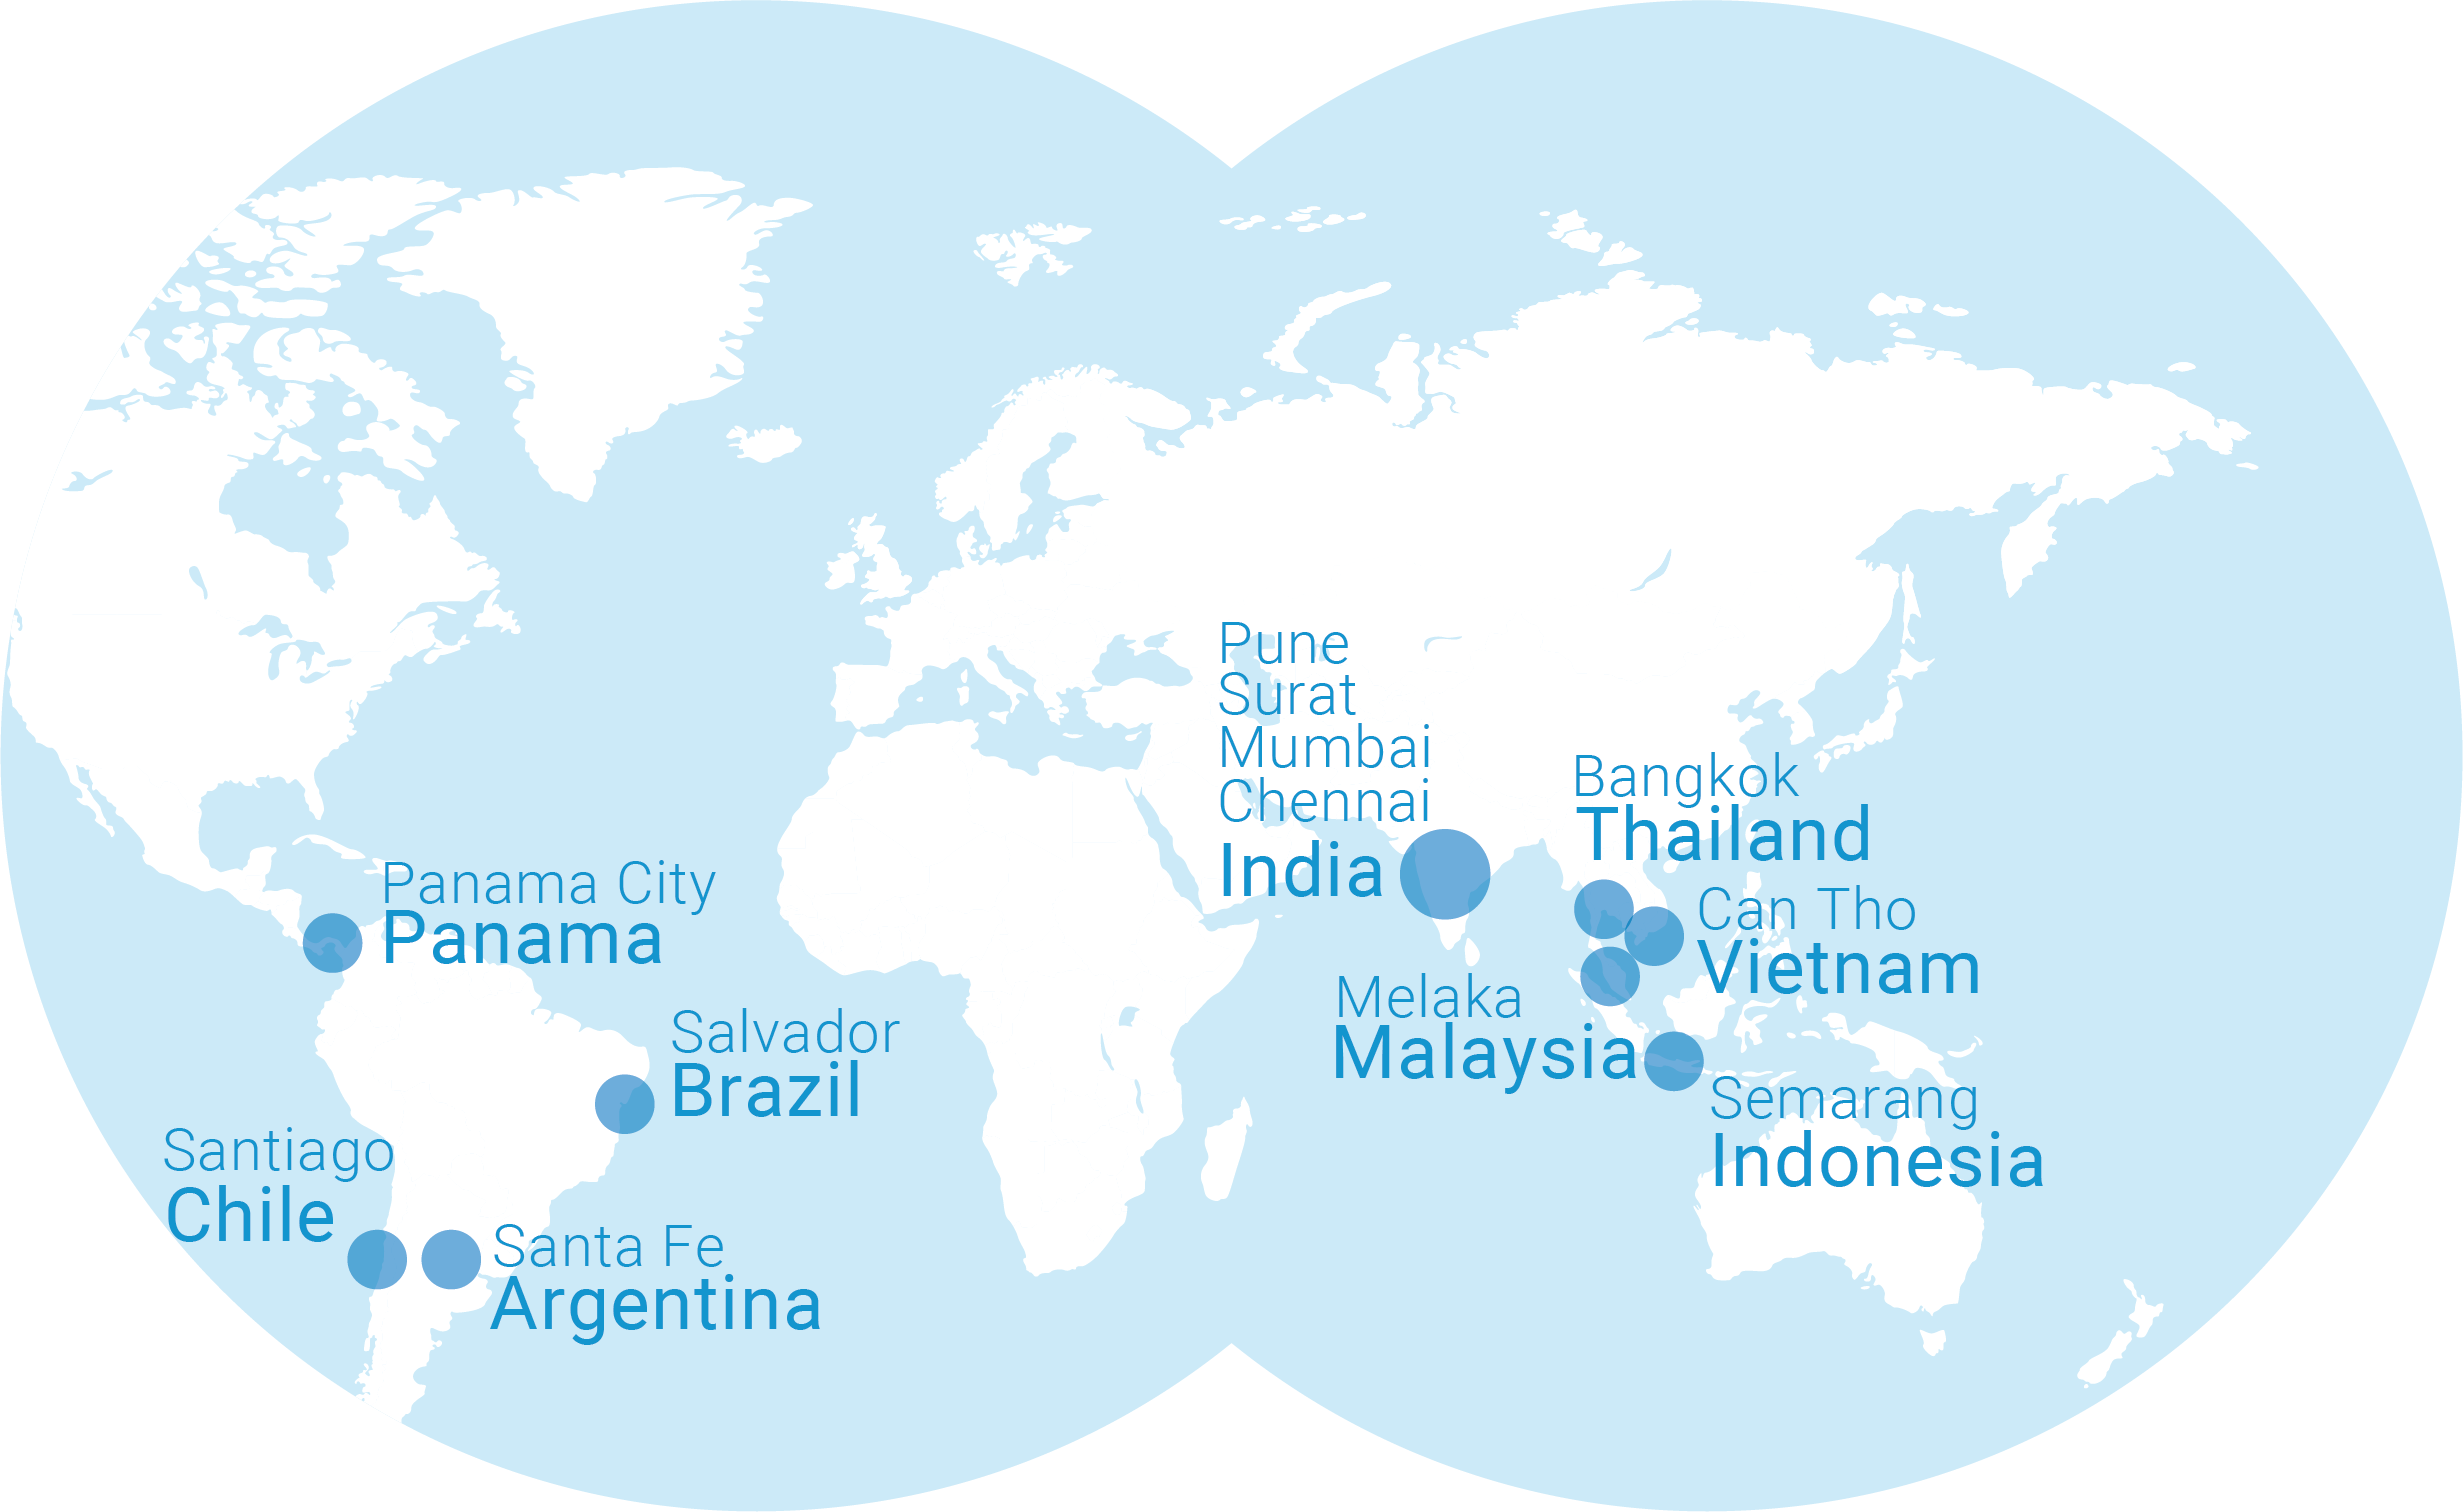 A infographic map that displays the 12 cities participating in the Urban Ocean Summit.